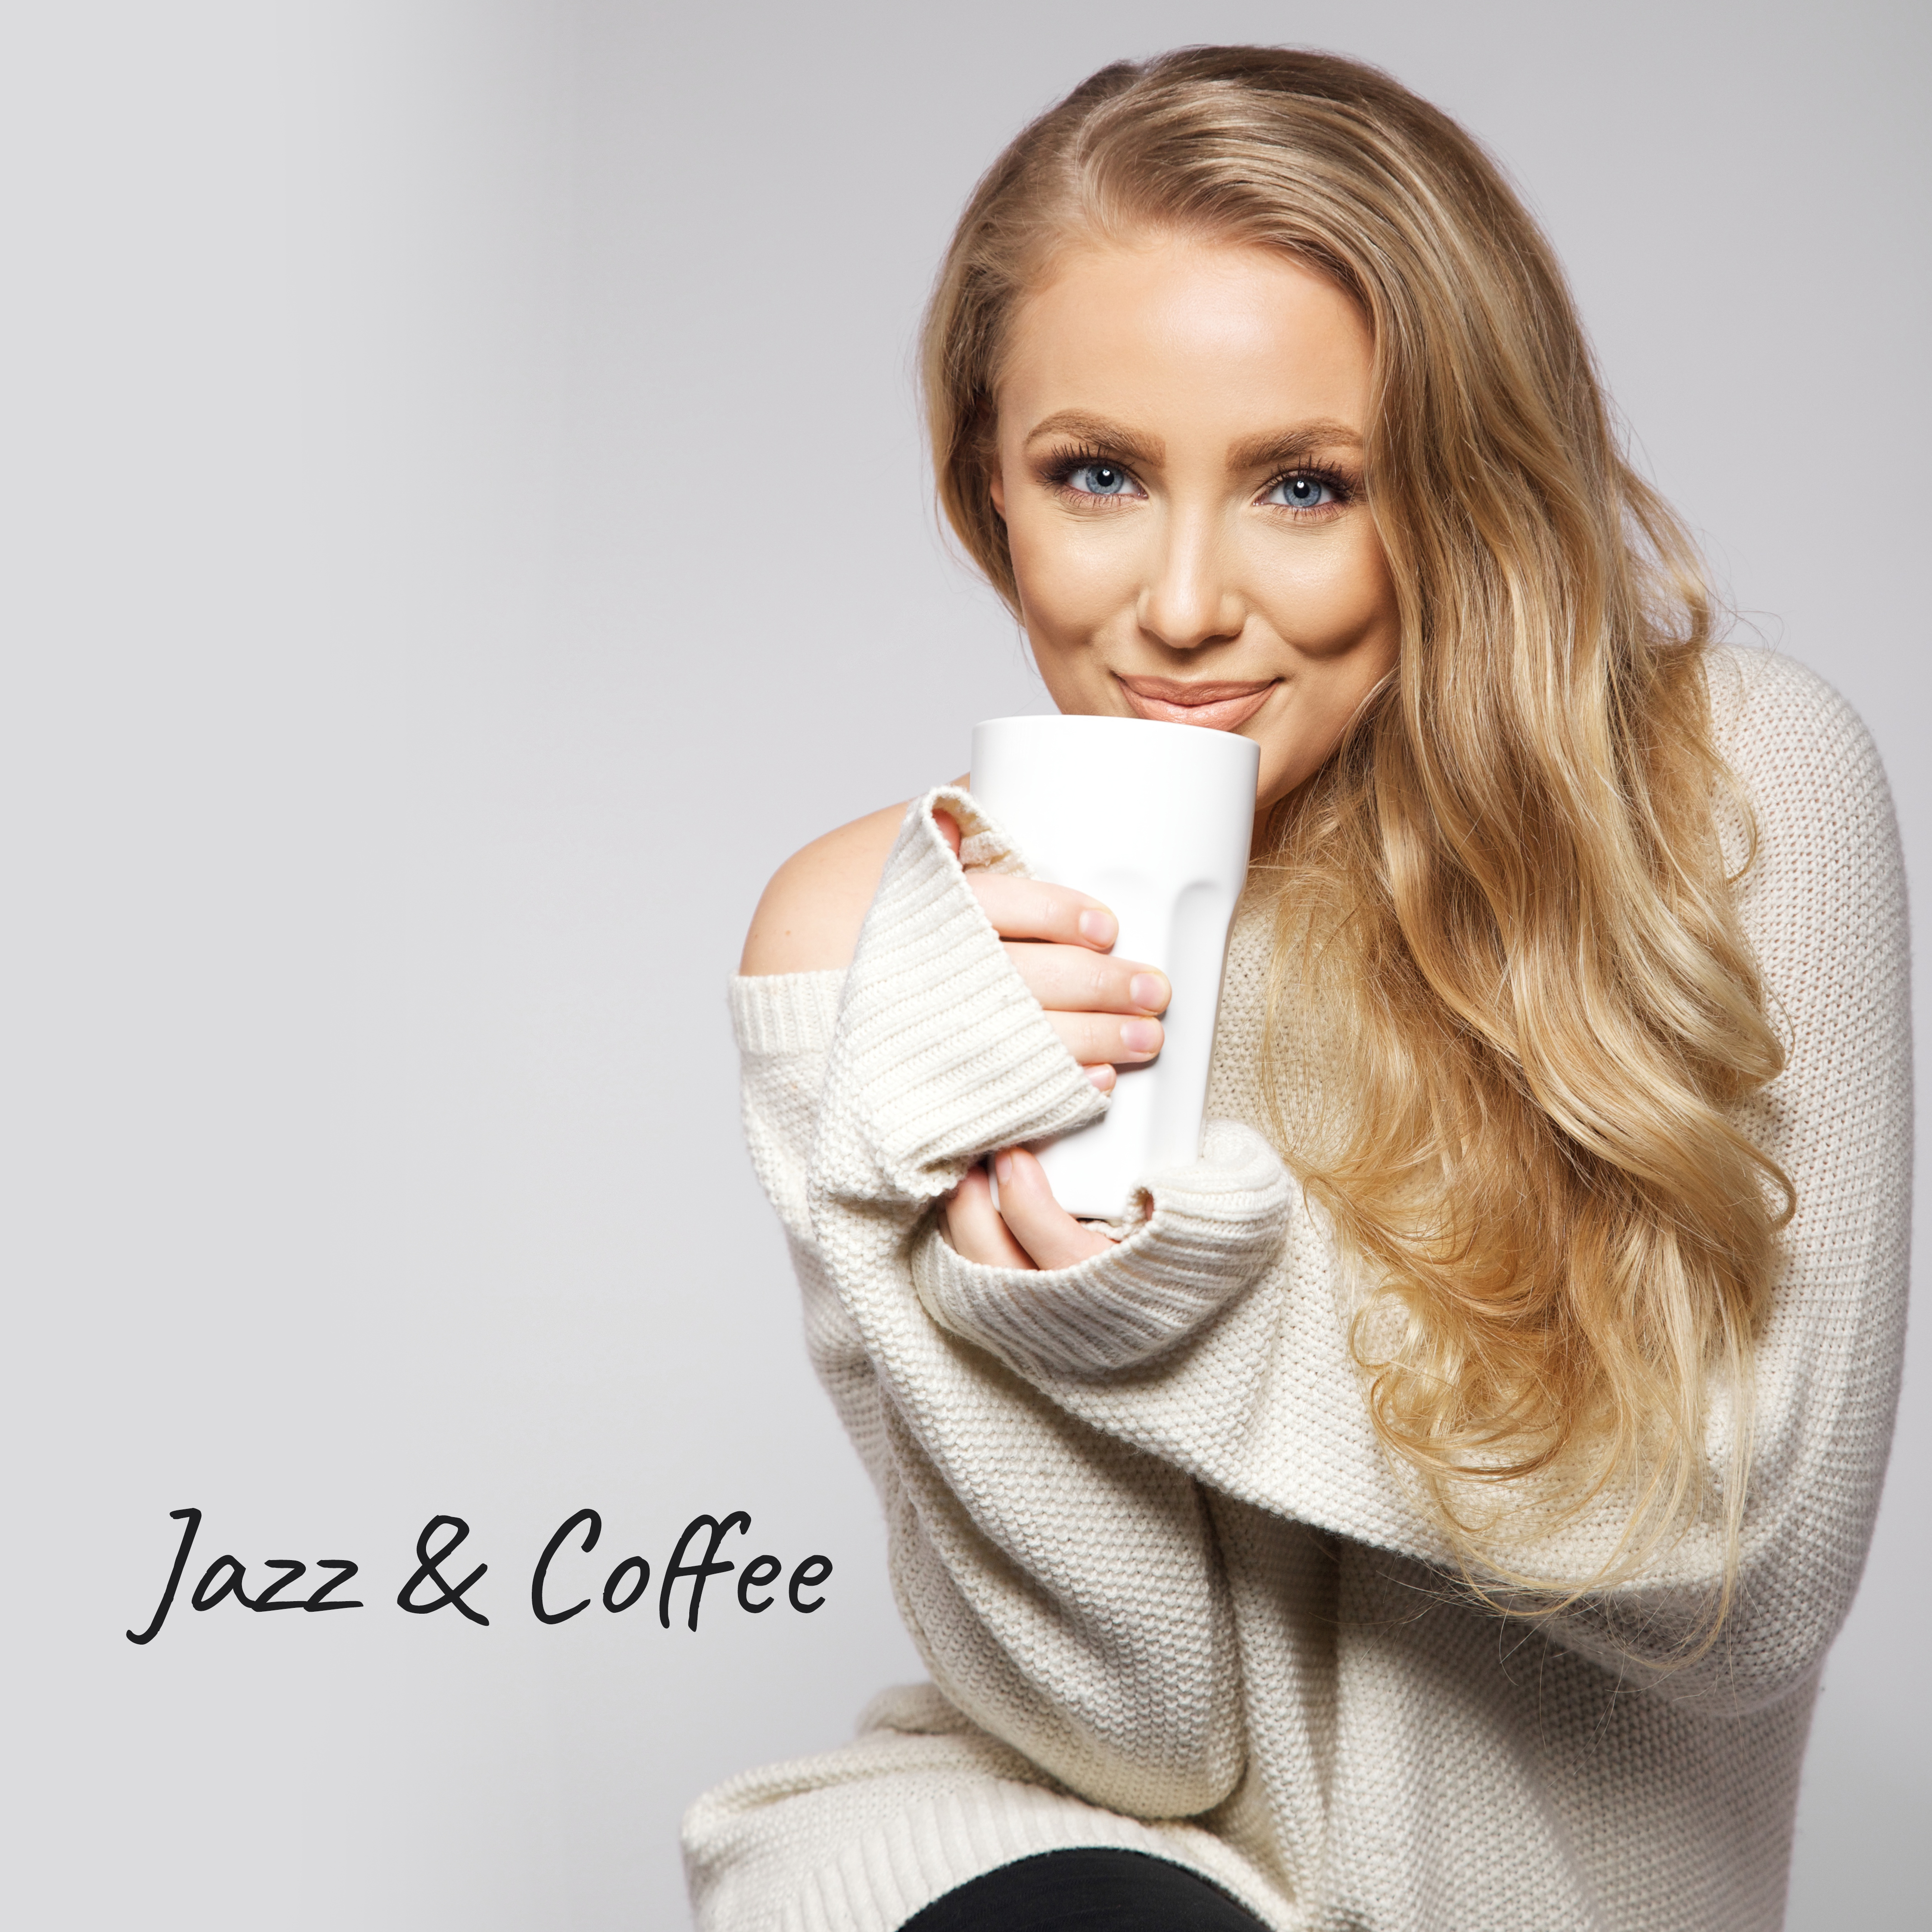 Jazz  Coffee  Restaurant Music, Jazz Cafe, Calming Melodies to Rest, Soothing Piano Music, Relax